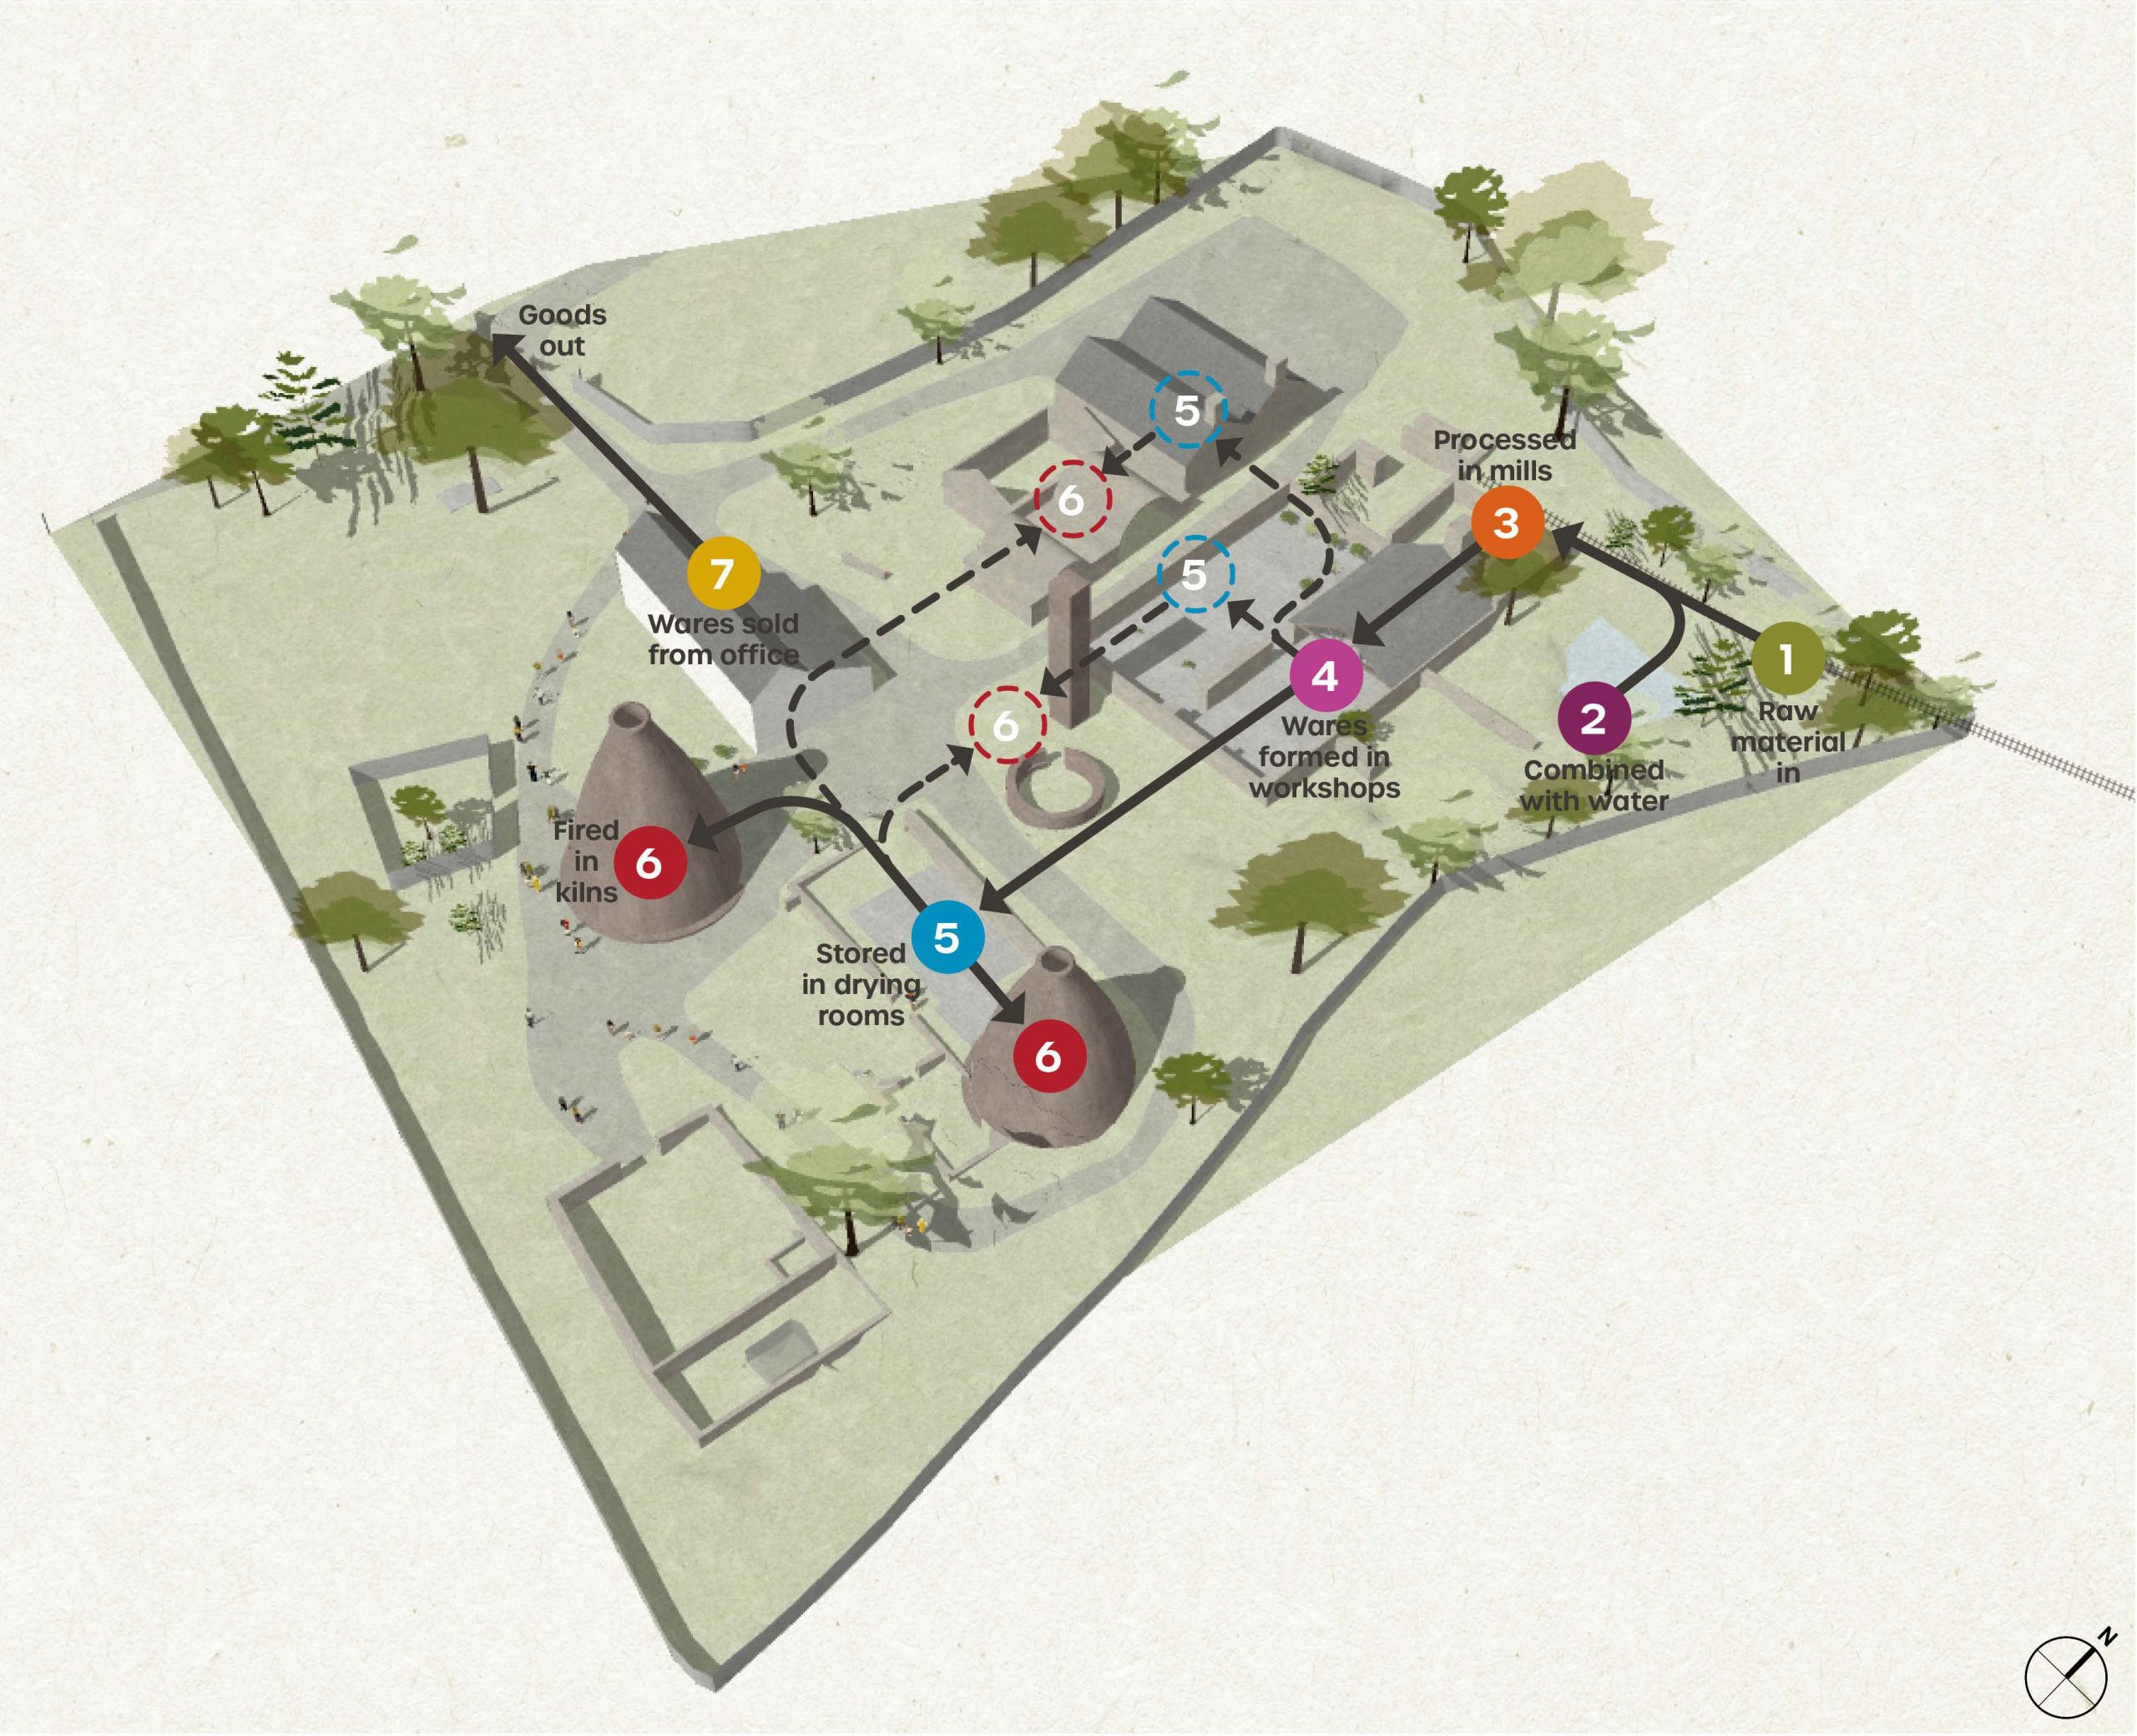 Process map of the site